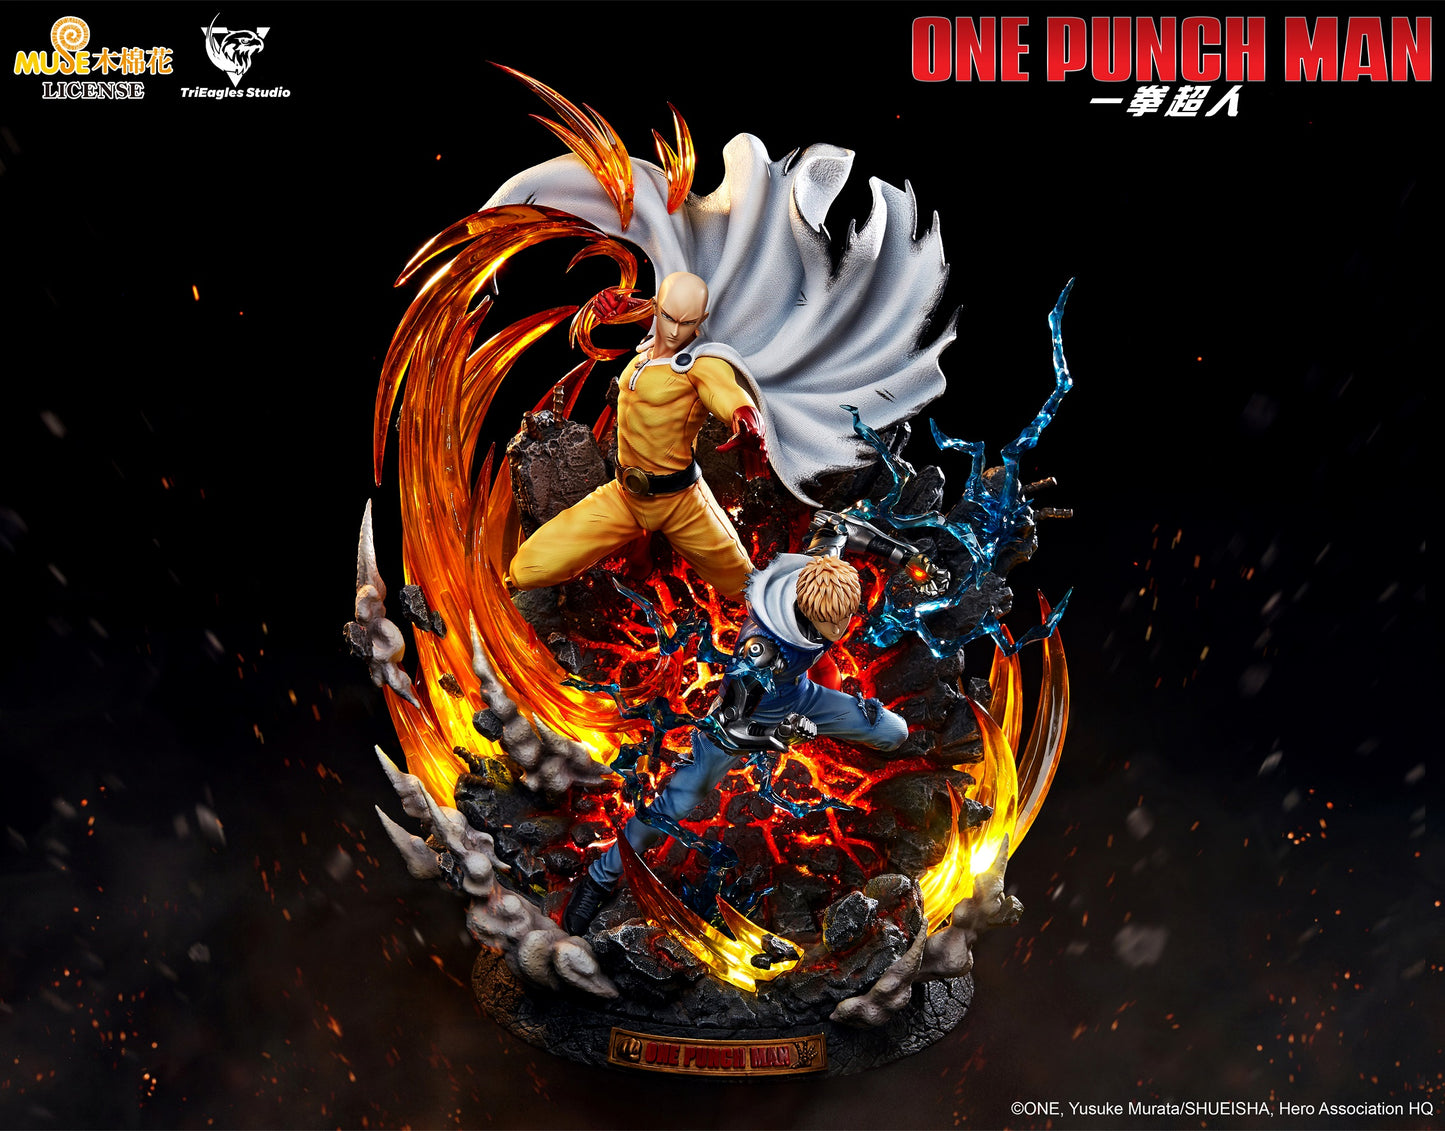 TRIEAGLES STUDIO – ONE PUNCH MAN: SAITAMA AND GENOS (LICENSED) [SOLD OUT]